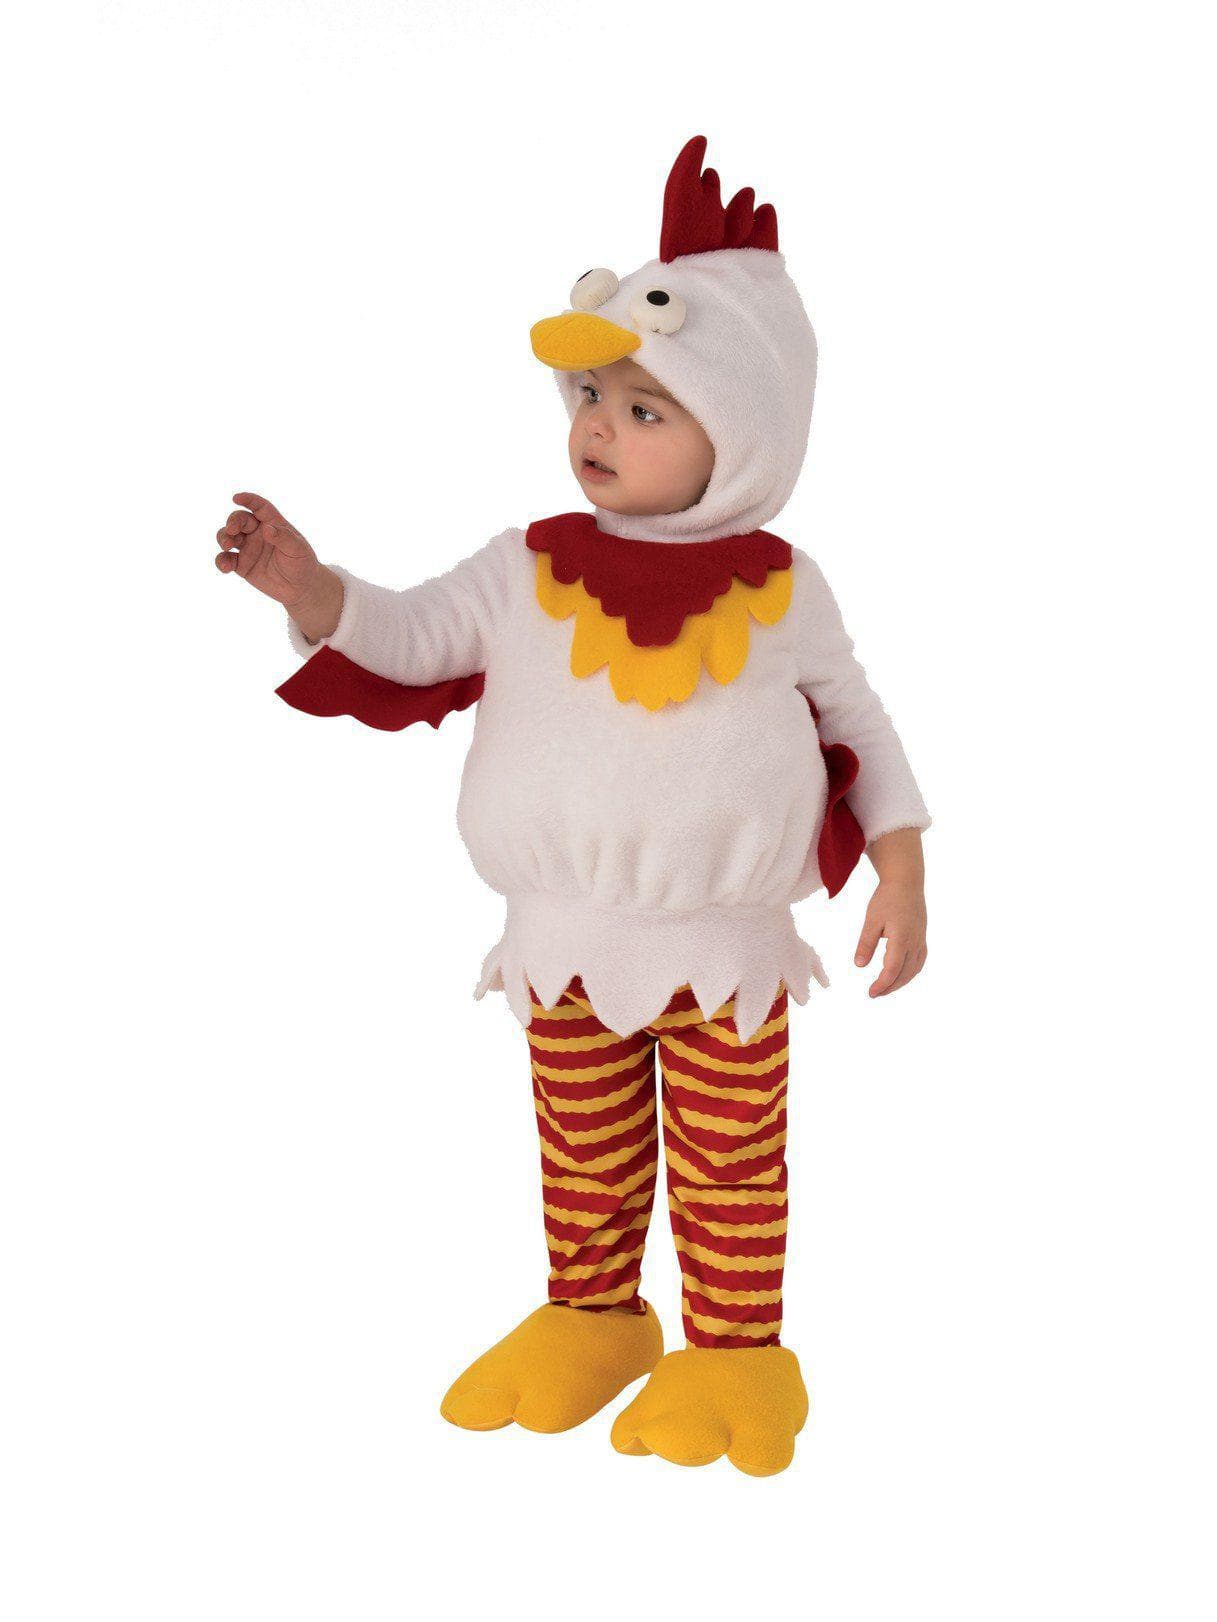 Chicken Costume for Babies and Toddlers - costumes.com